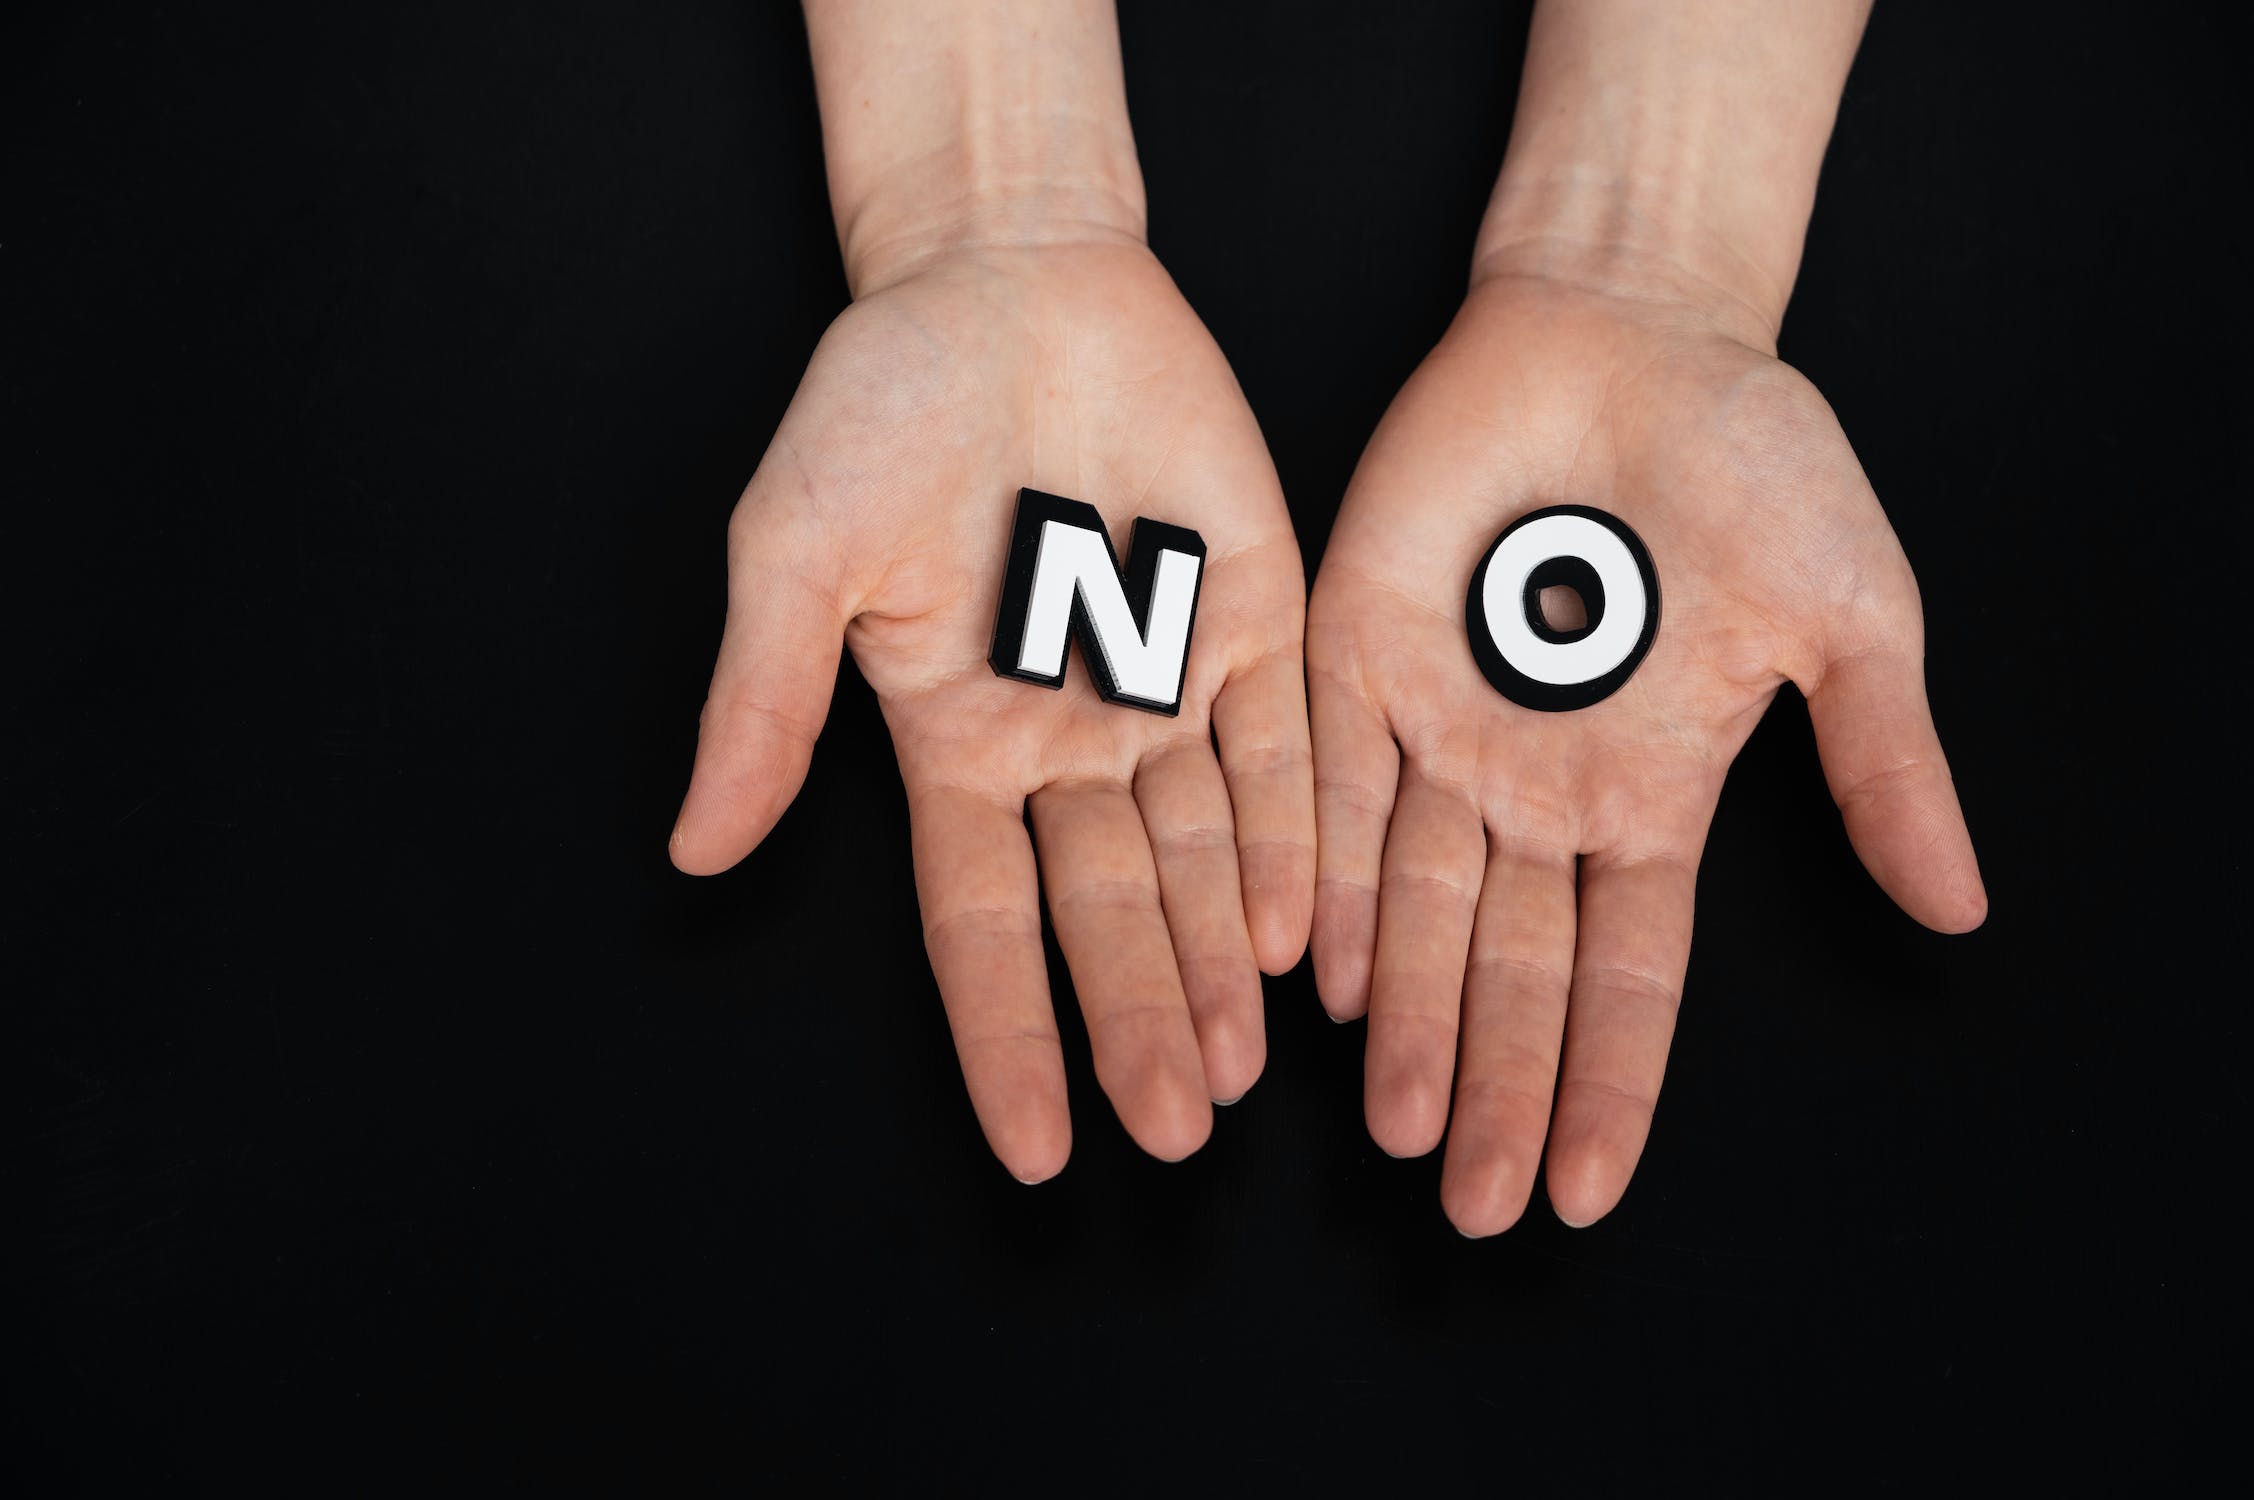 How To Say No - And 5 Ways to Set Boundaries in a Healthy Way!